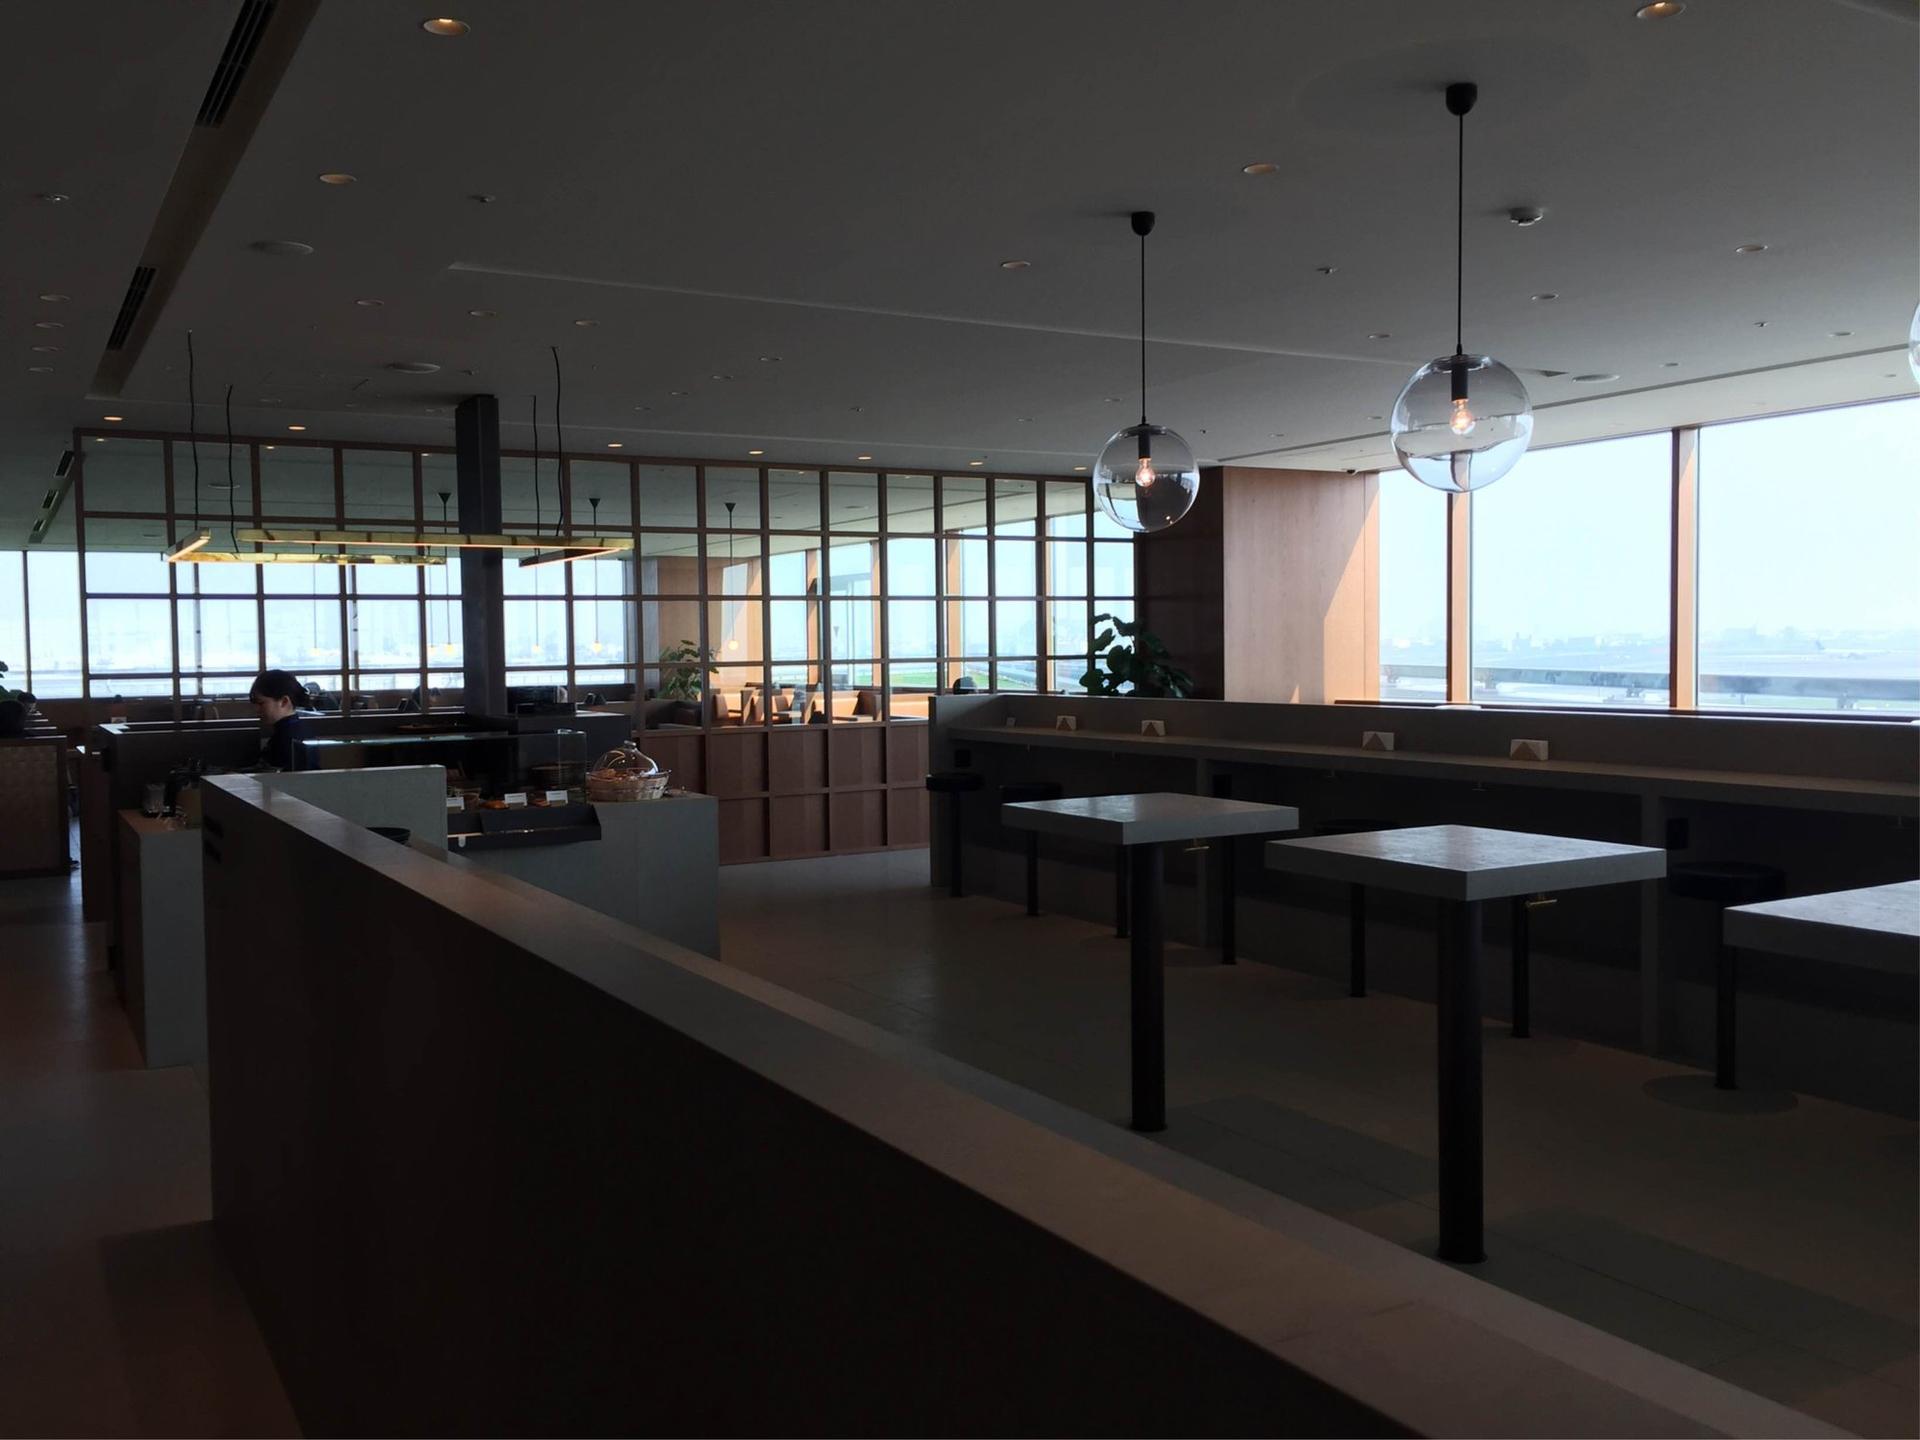 Cathay Pacific Lounge image 41 of 49